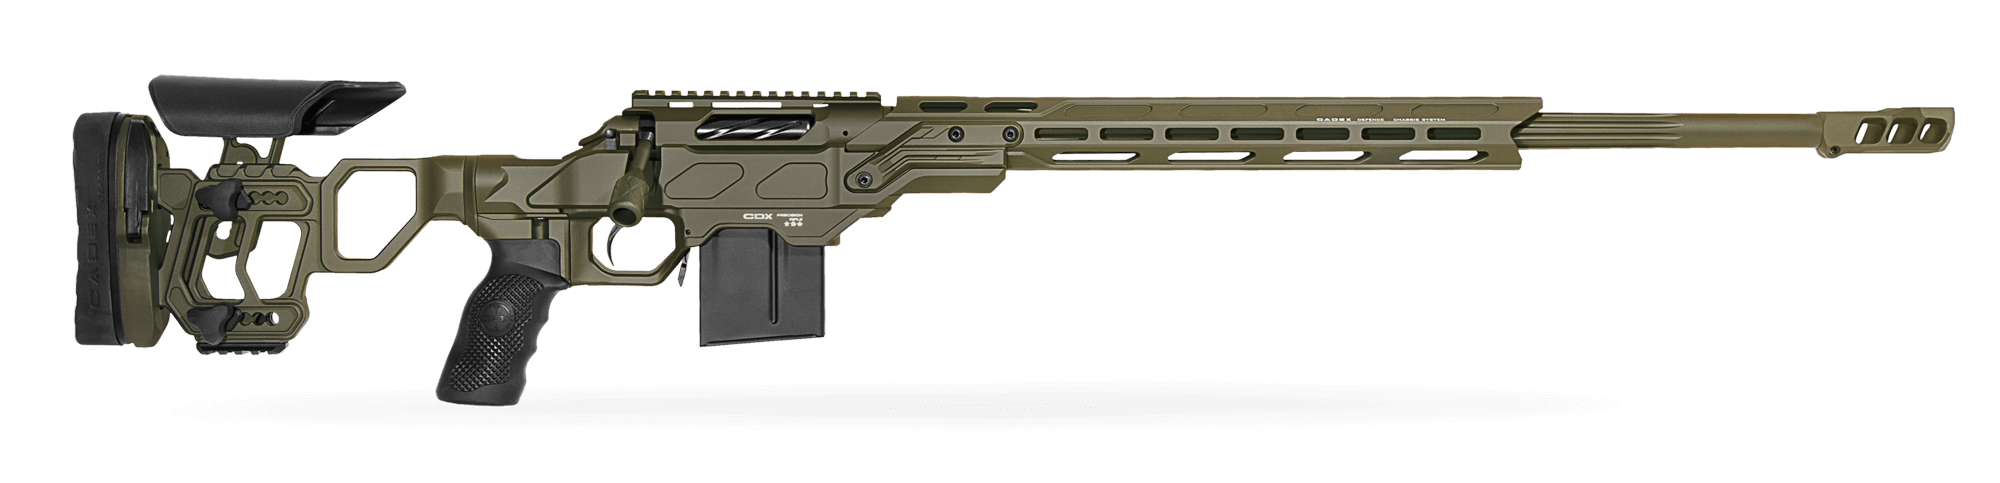 Cadex Defense CDX-R7 Sniper Rifle - Finished Projects - Blender